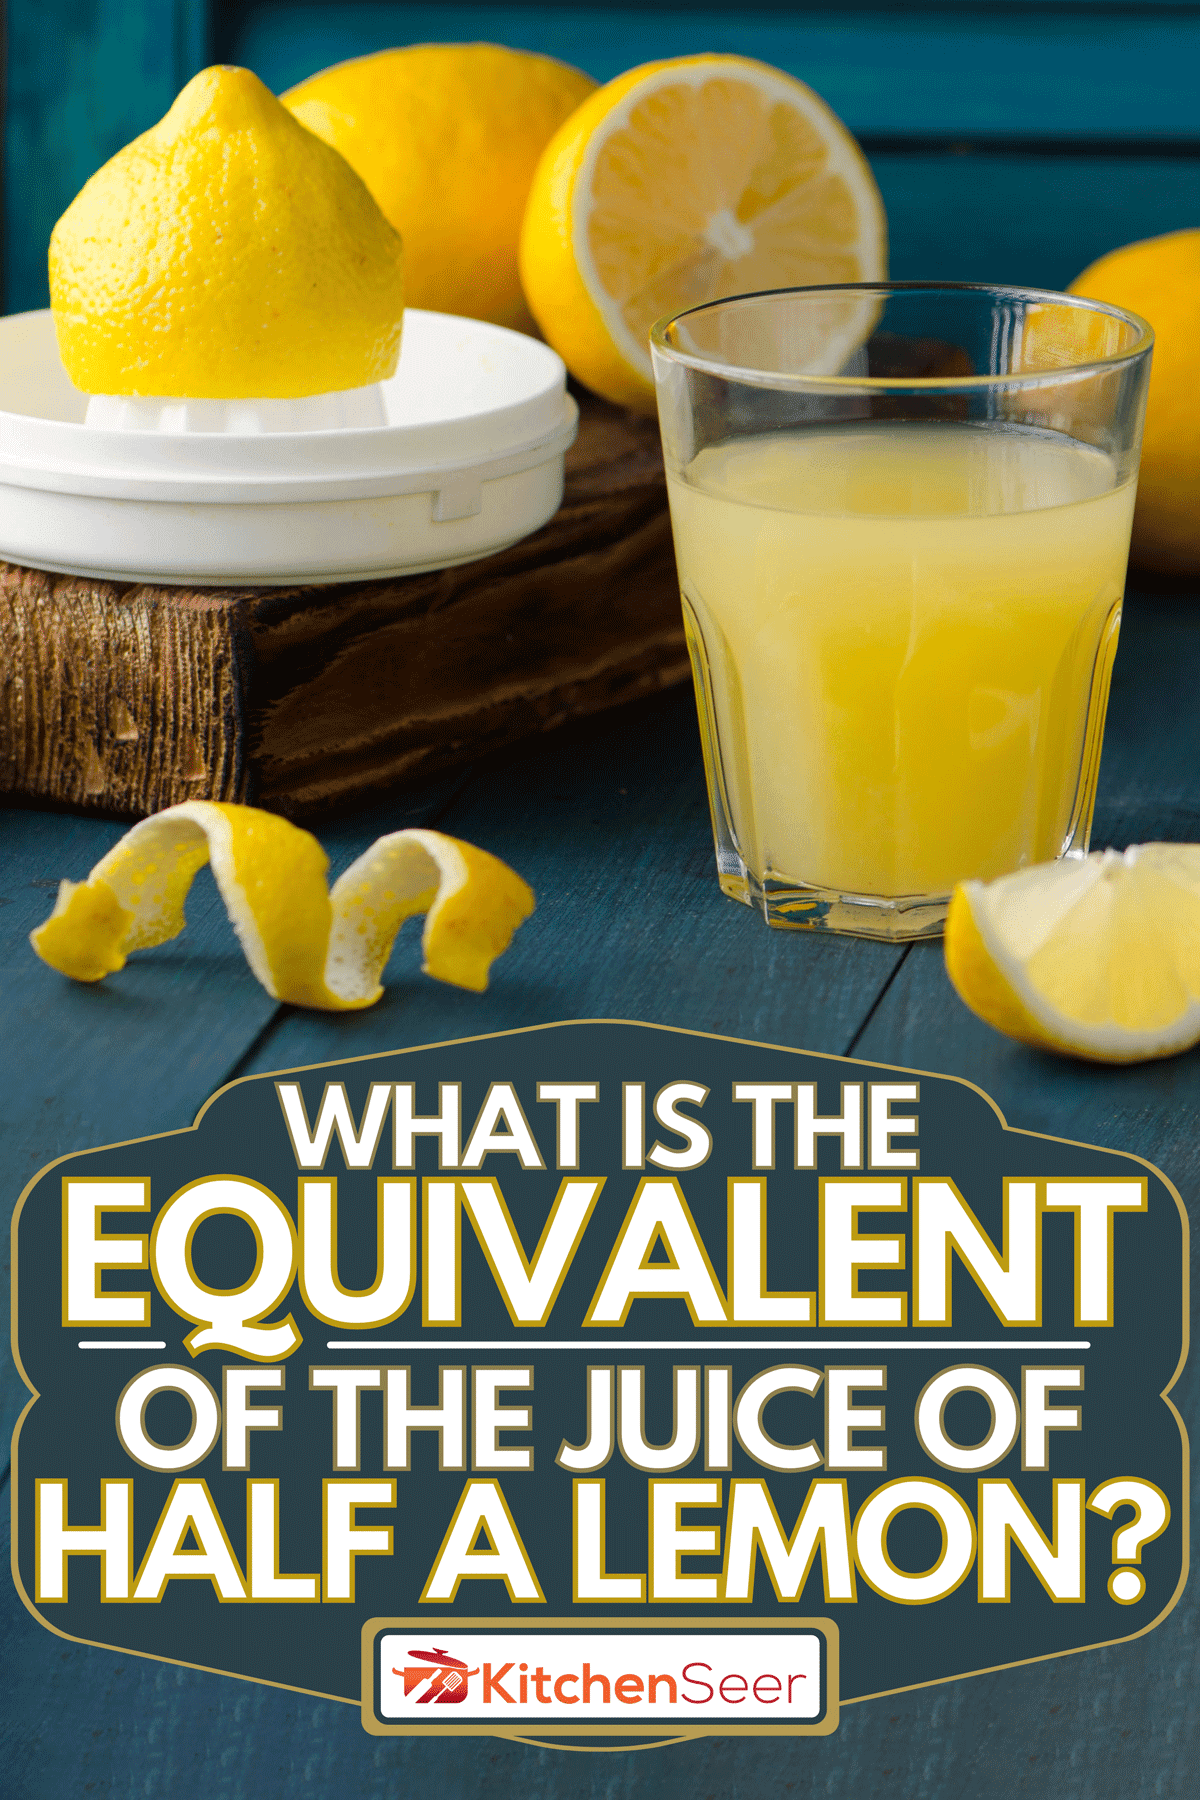 A glass full of lemon juice, What Is The Equivalent Of The Juice Of Half A Lemon?